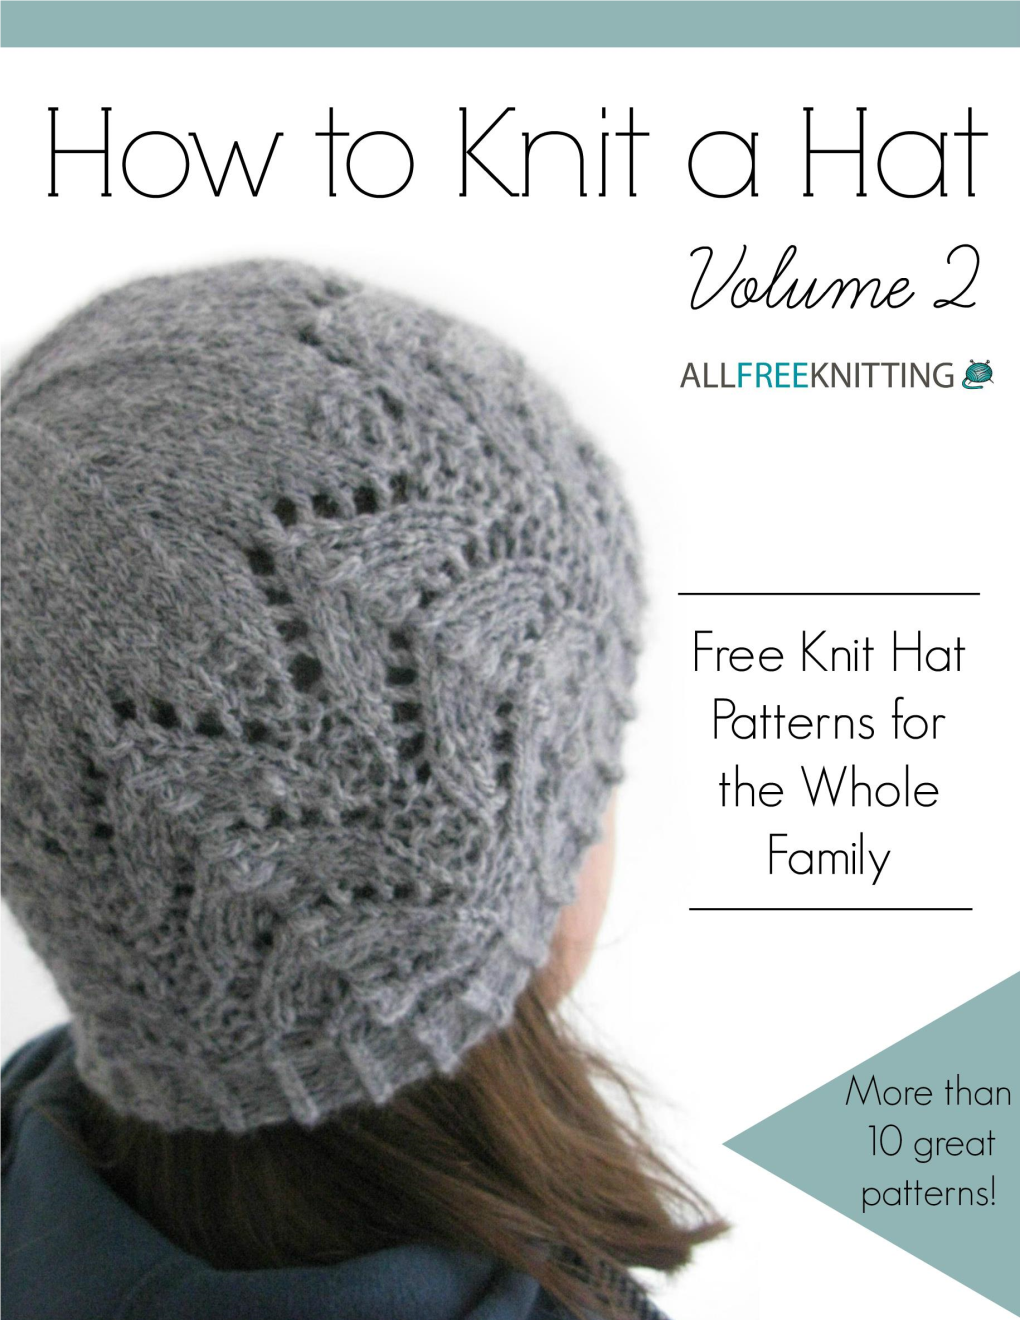 Free Knit Hat Patterns for the Whole Family